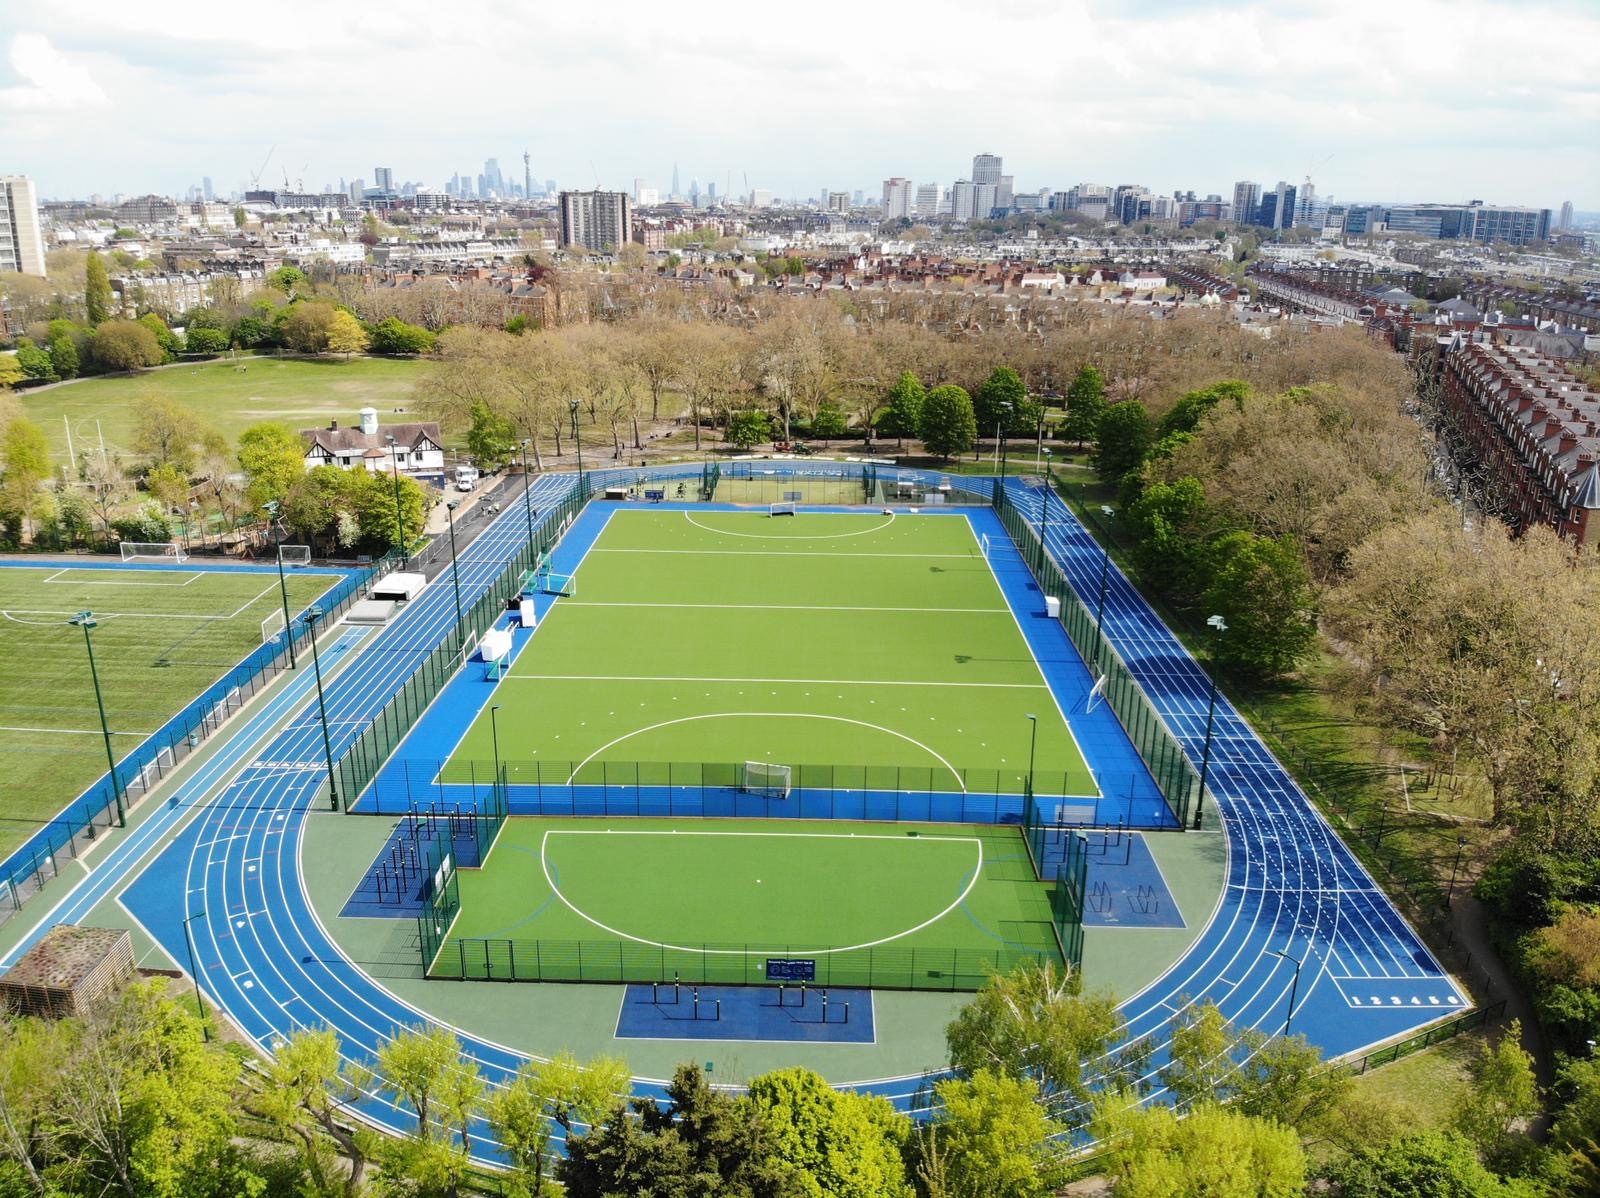 The athletics track surface is part of Paddington Recreation Ground, which welcomes 1.2 million visitors every year.